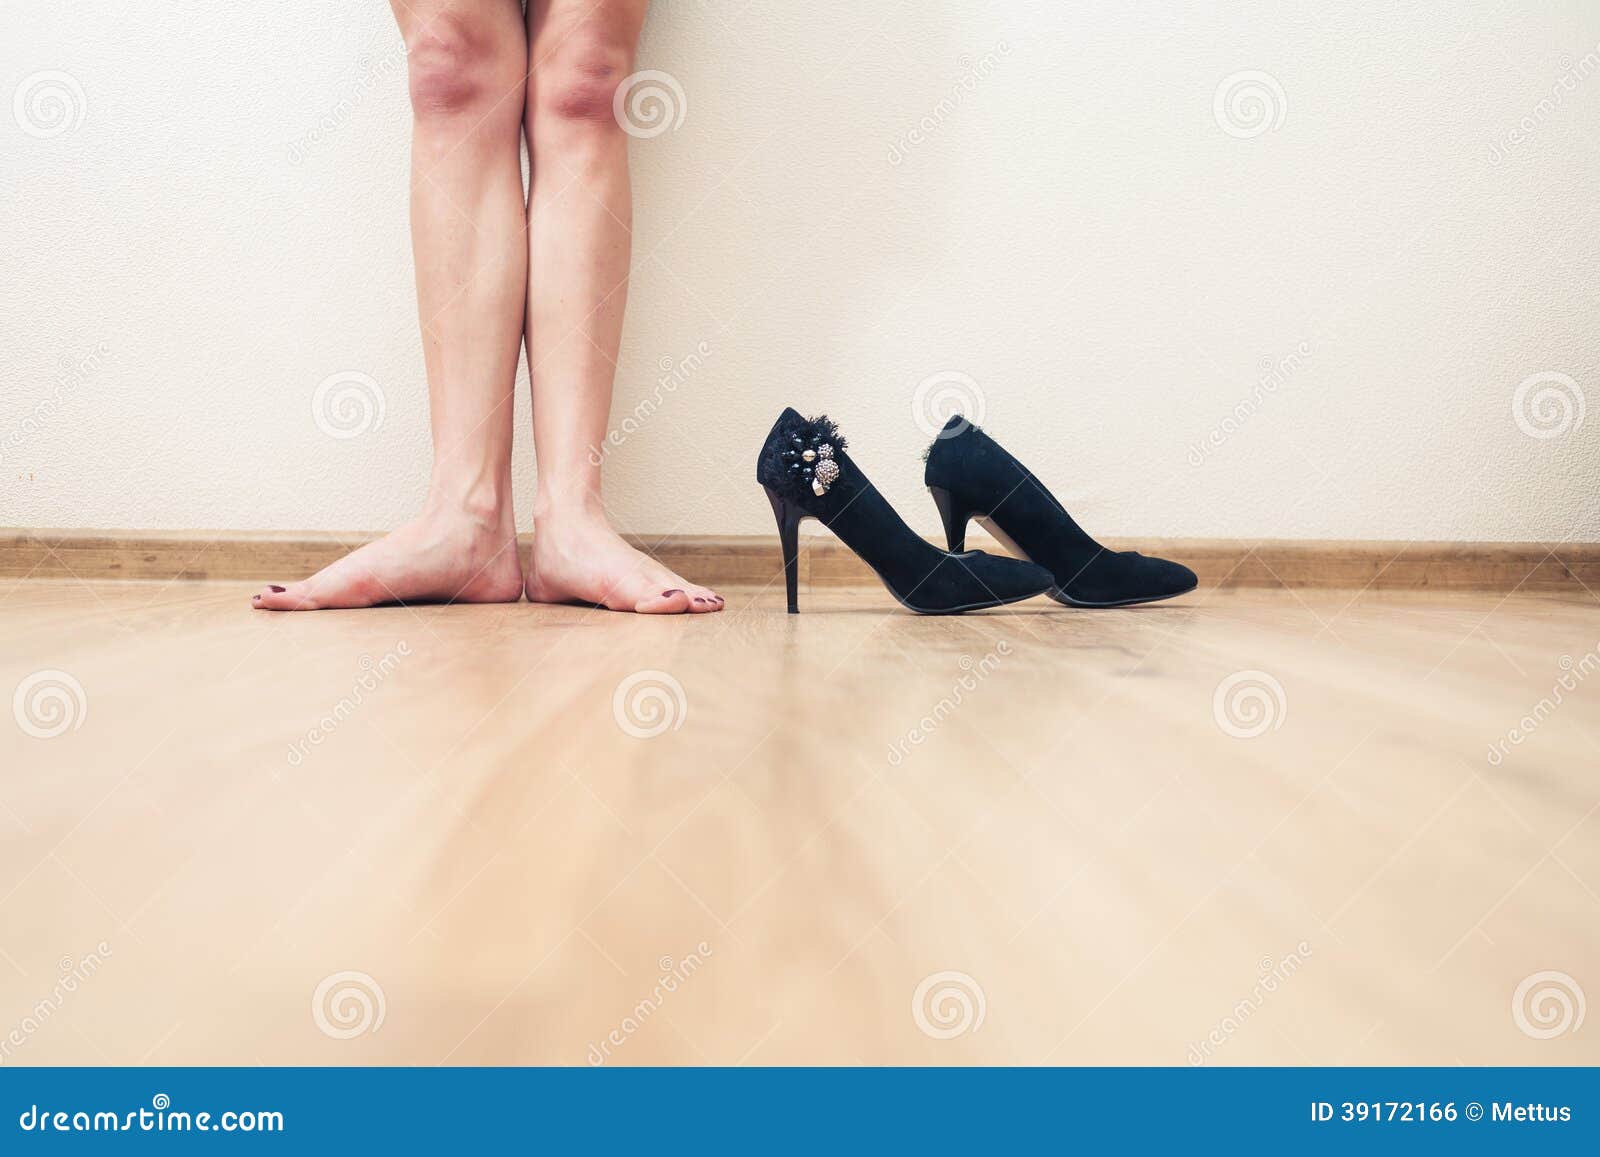 Bare Legs and High Heels Near Stock Photo - Image of lifestyle, dance